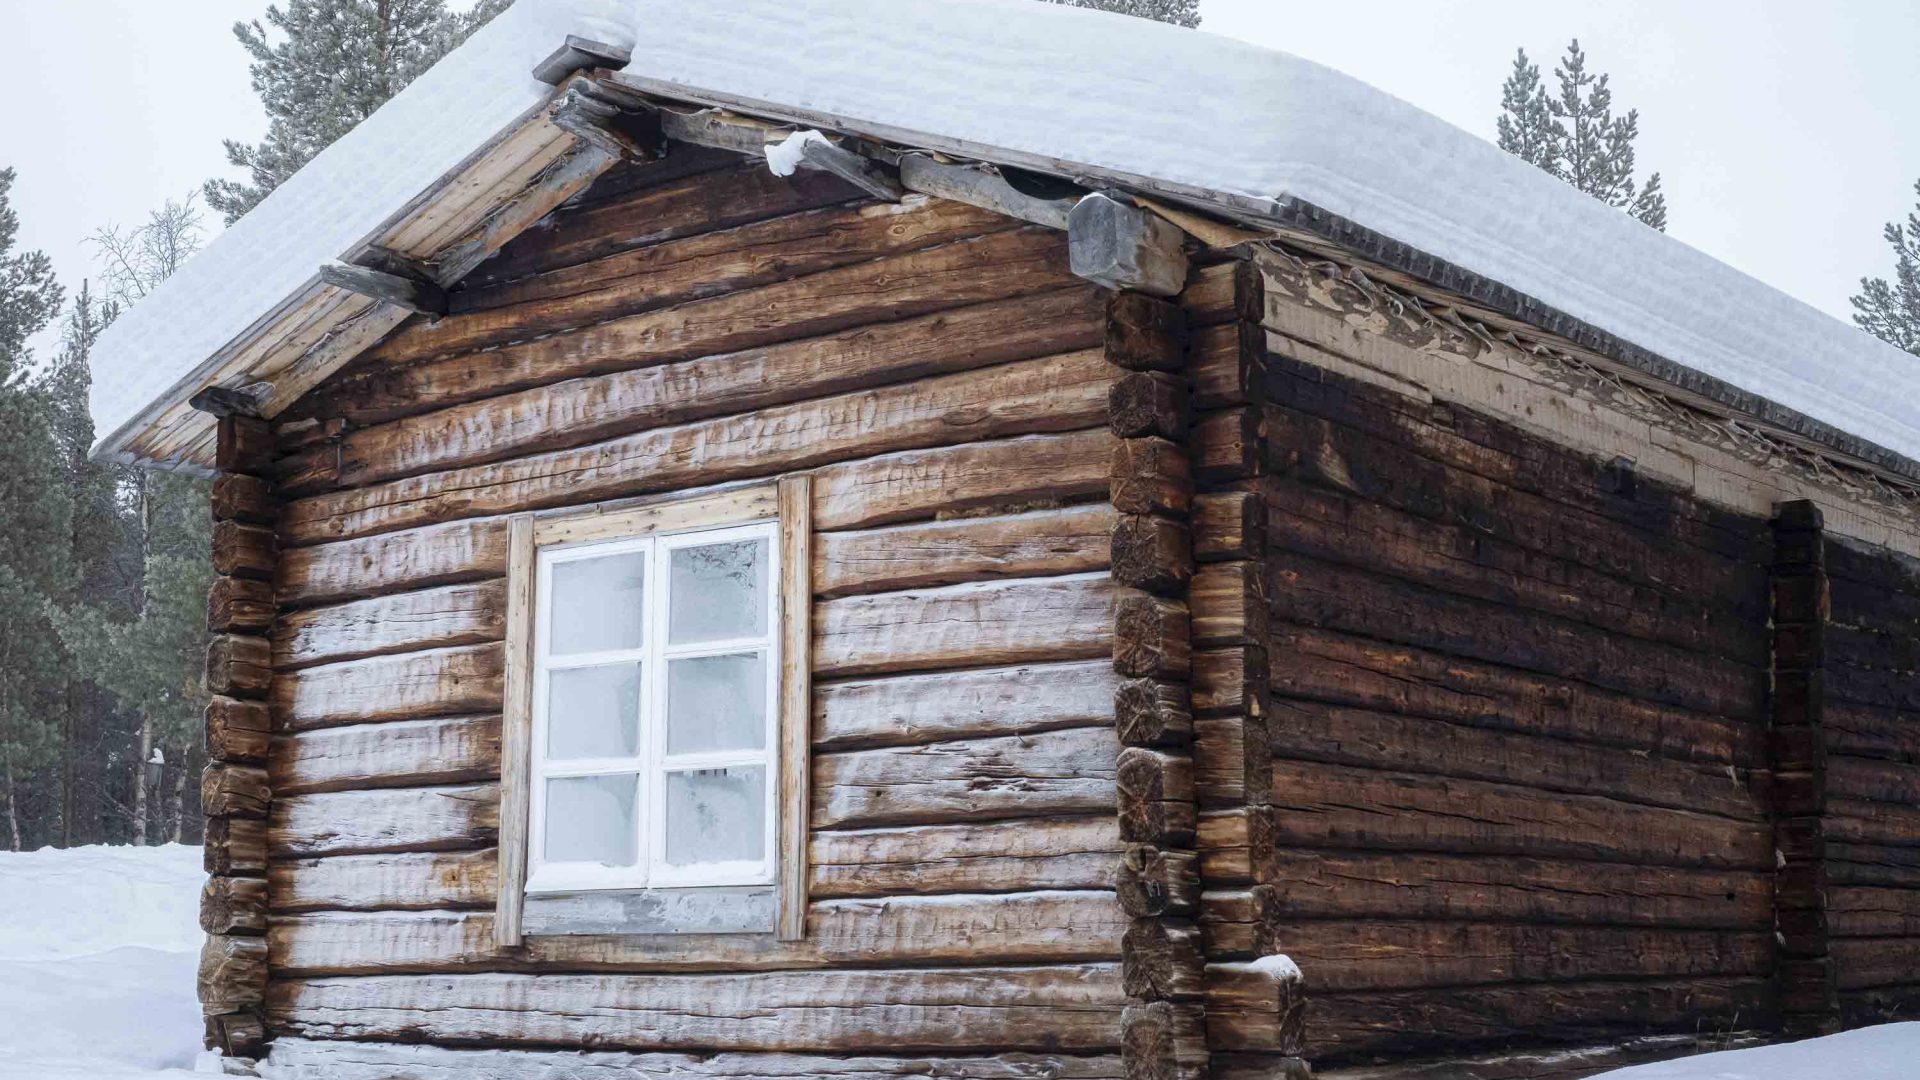 A snow-topped wooden homestead against a snowy background.